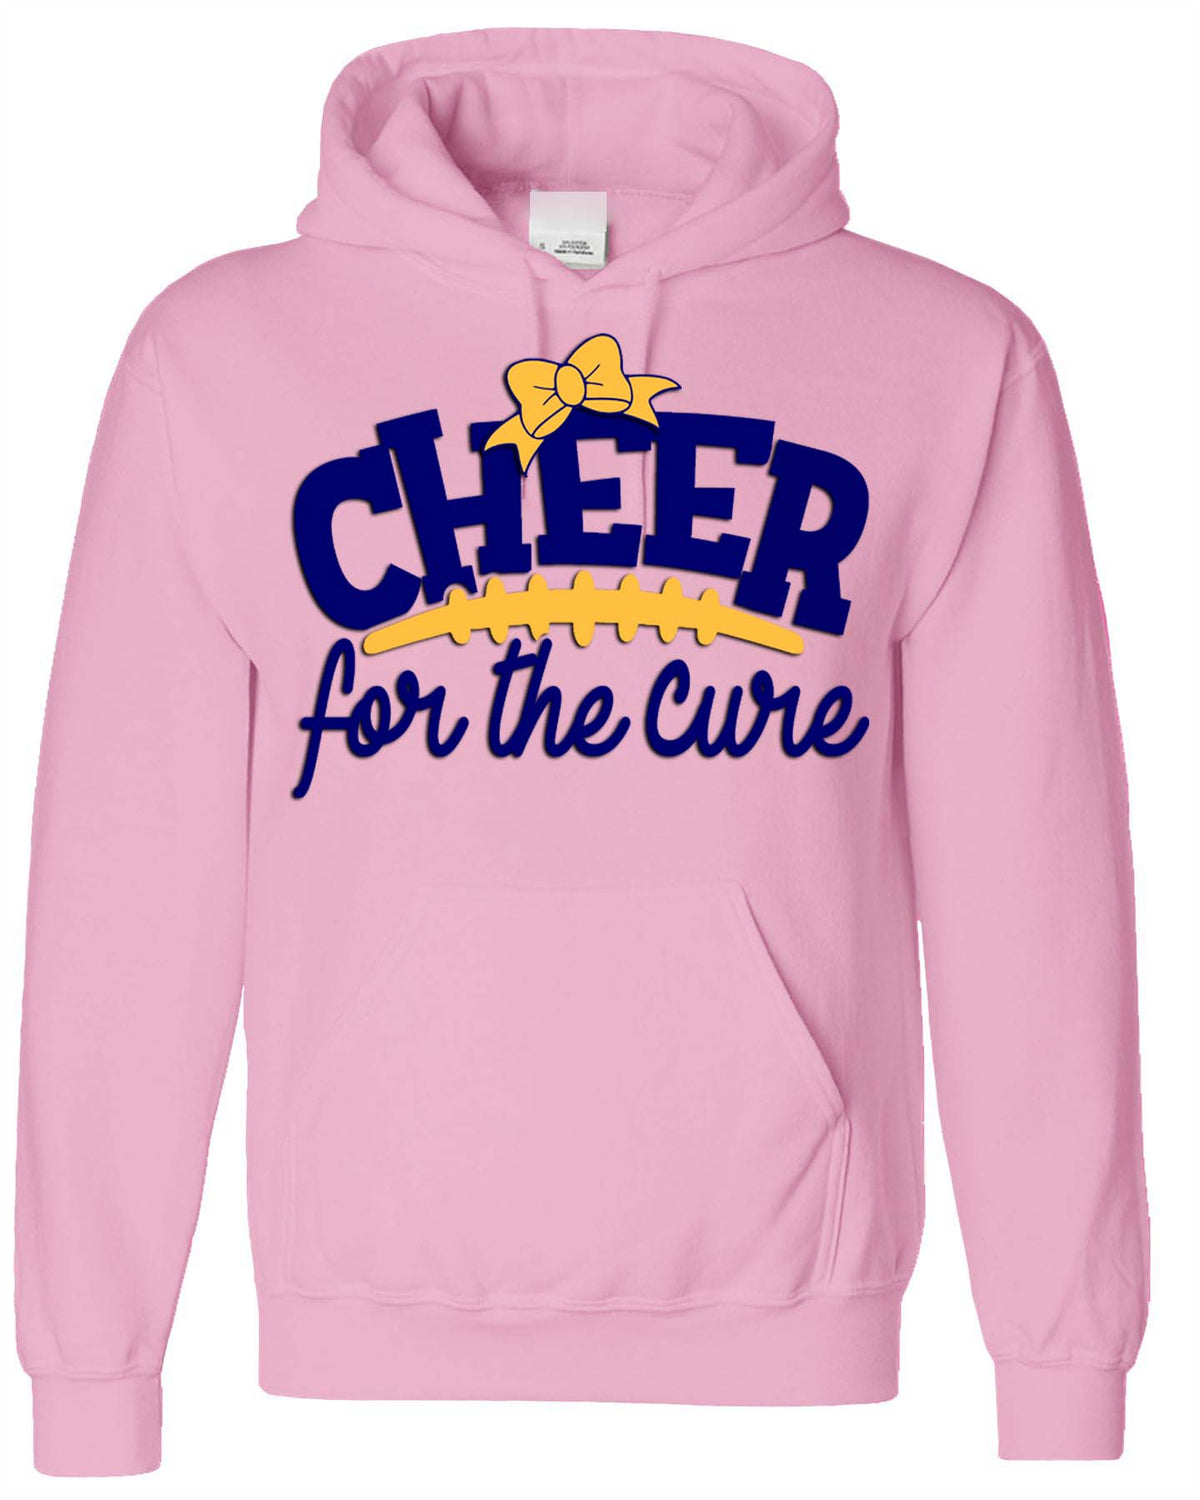 Cheer for the cure shirt